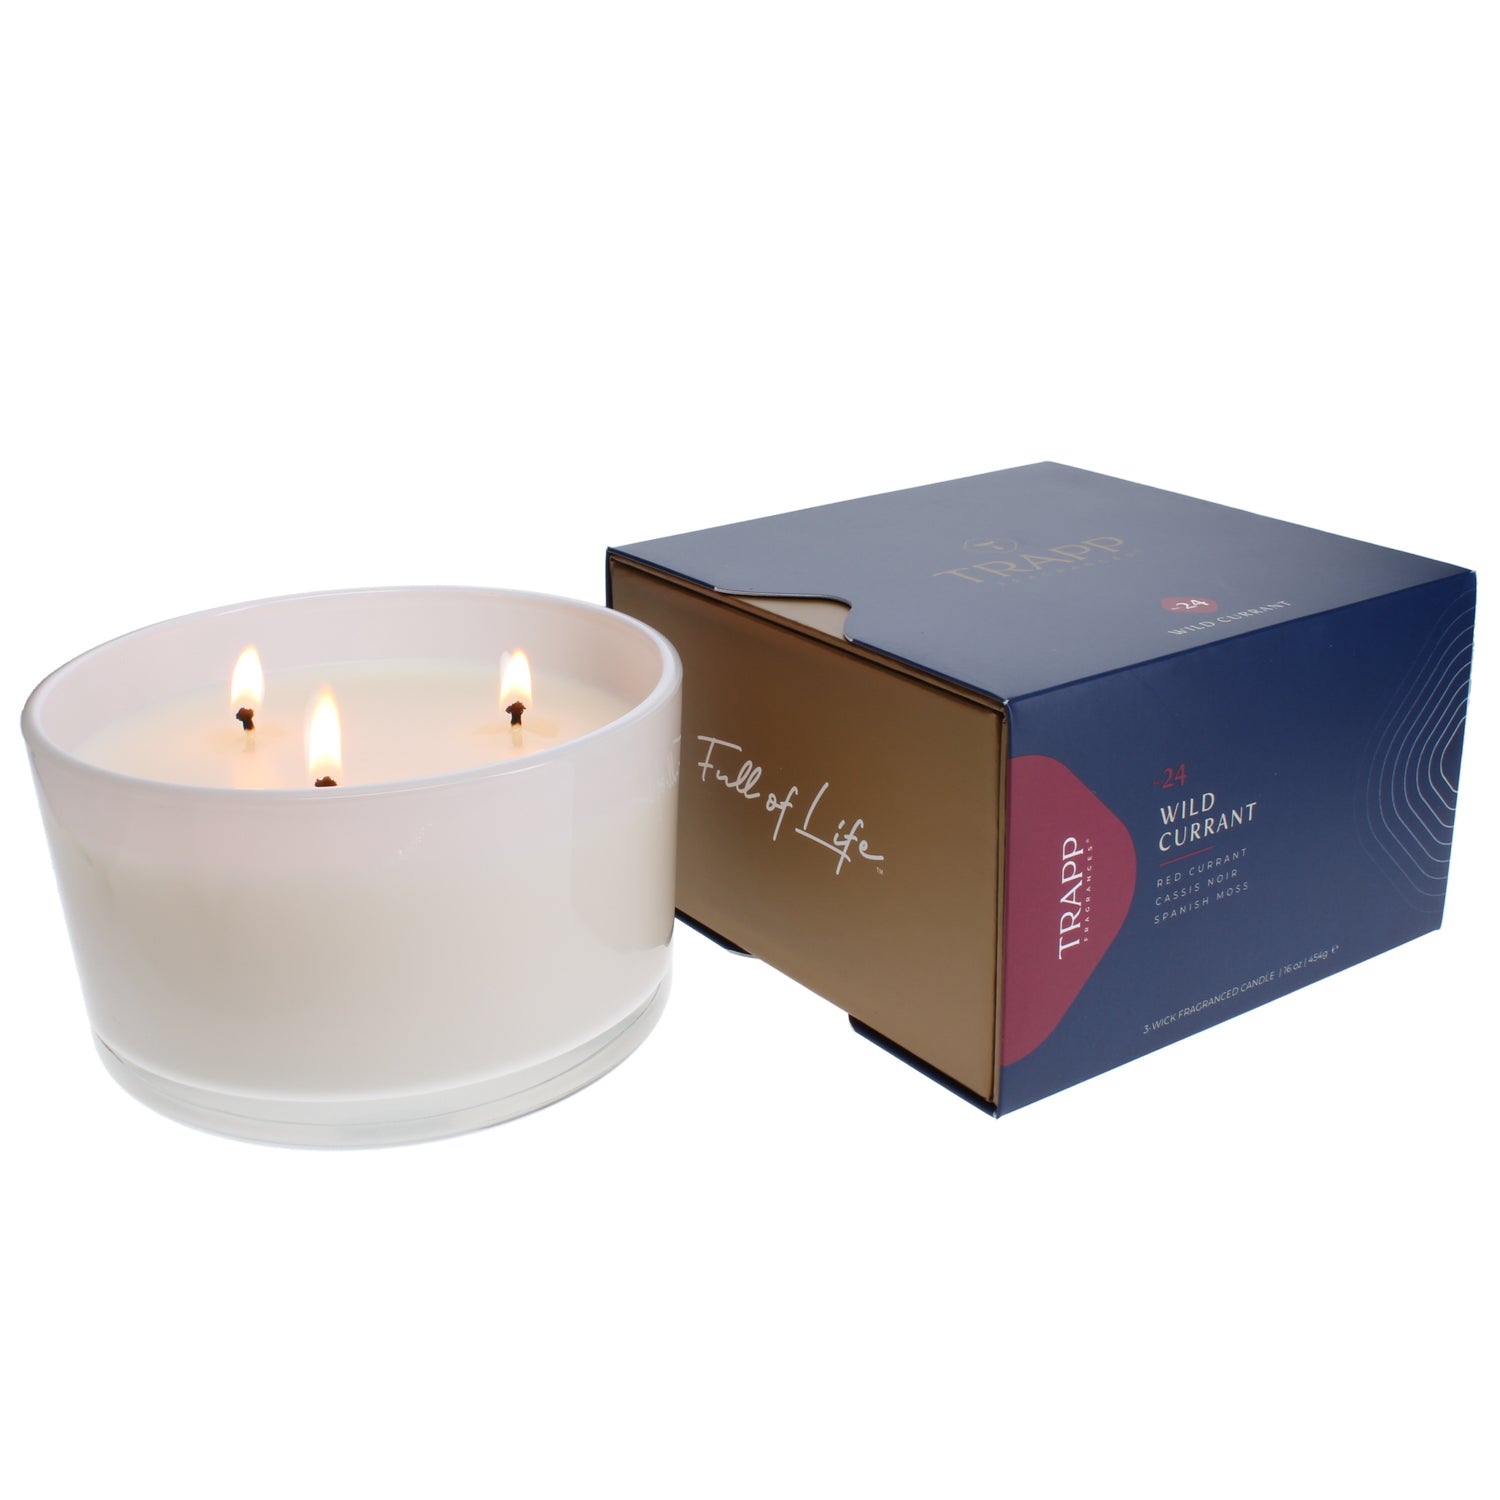 No. 24 Wild Currant 16 oz. 3-Wick Candle Image 2